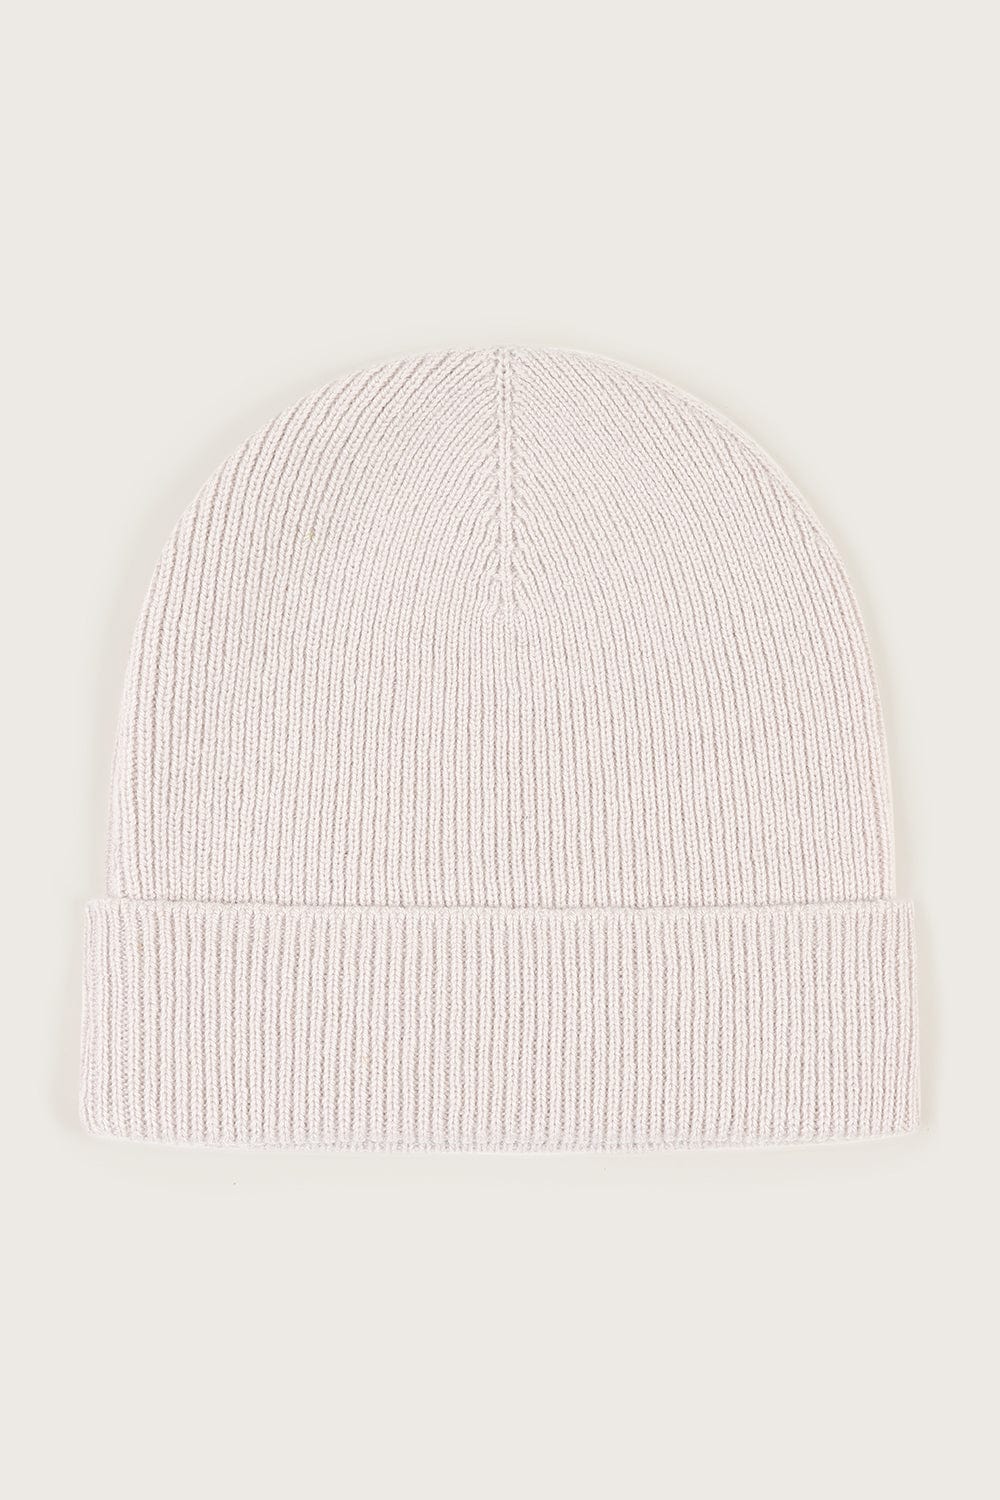 EZRA Knitted Cashmere Blend Beanie in Sand